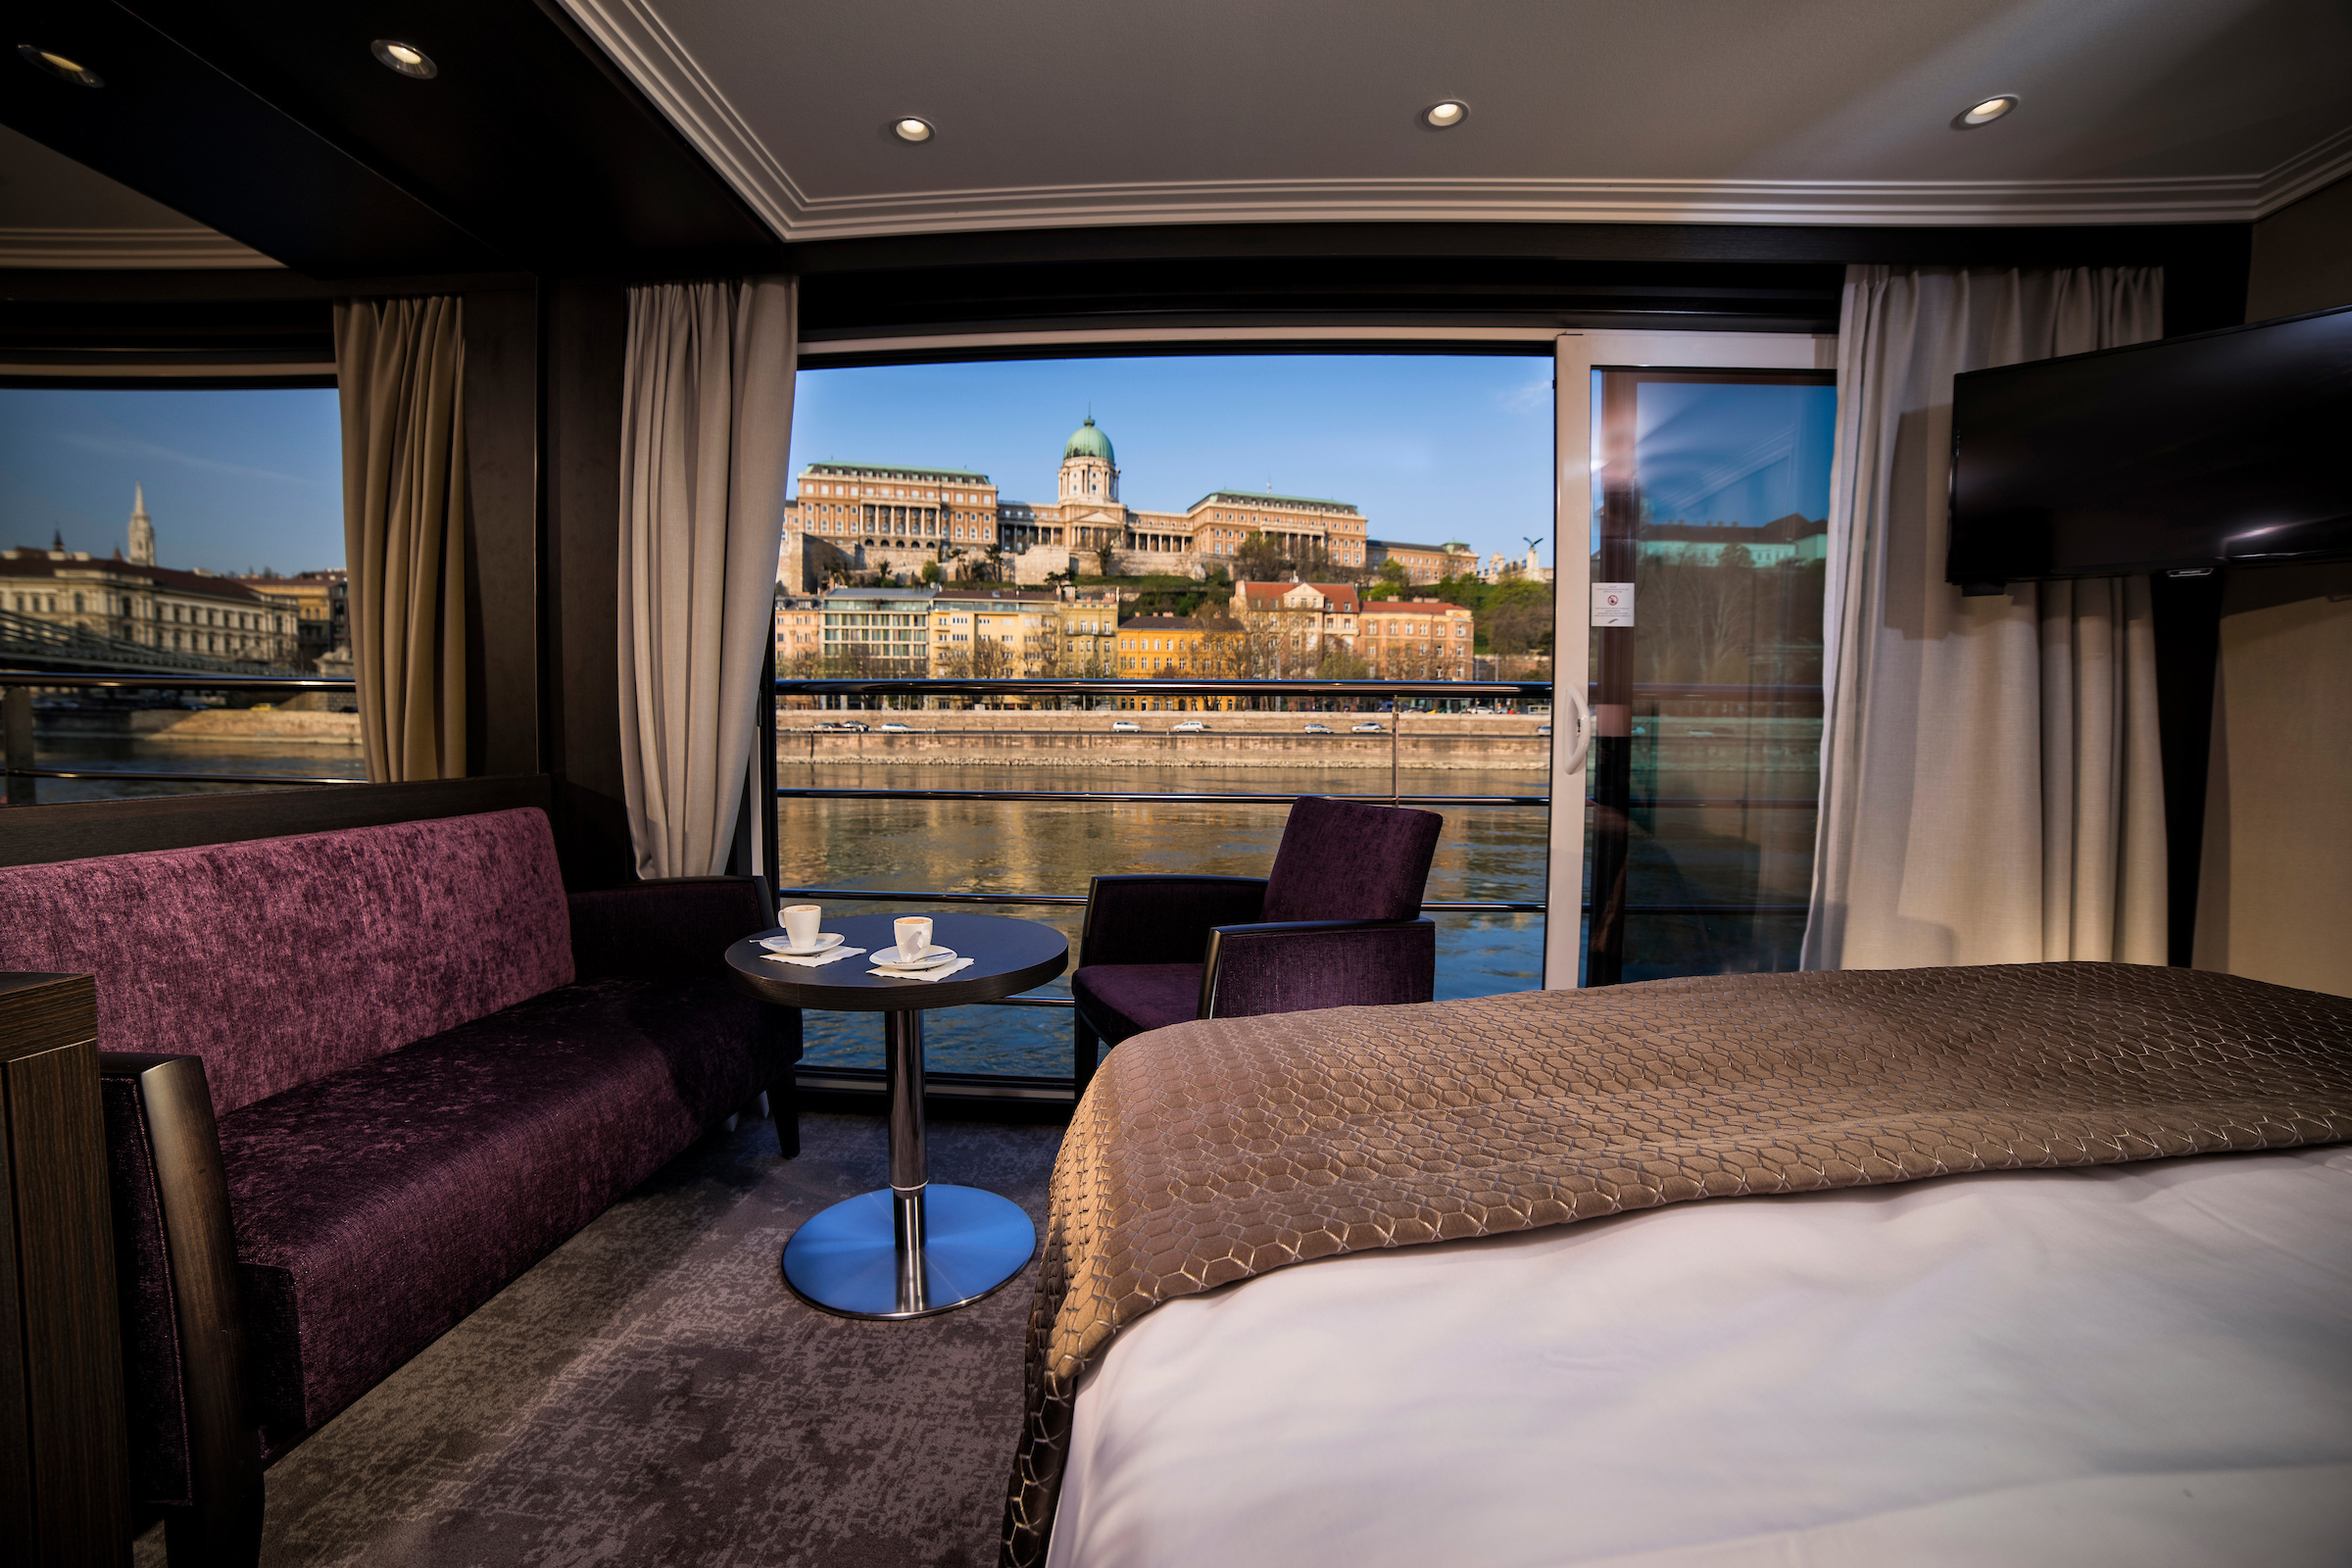 river cruise bed facing the scenery